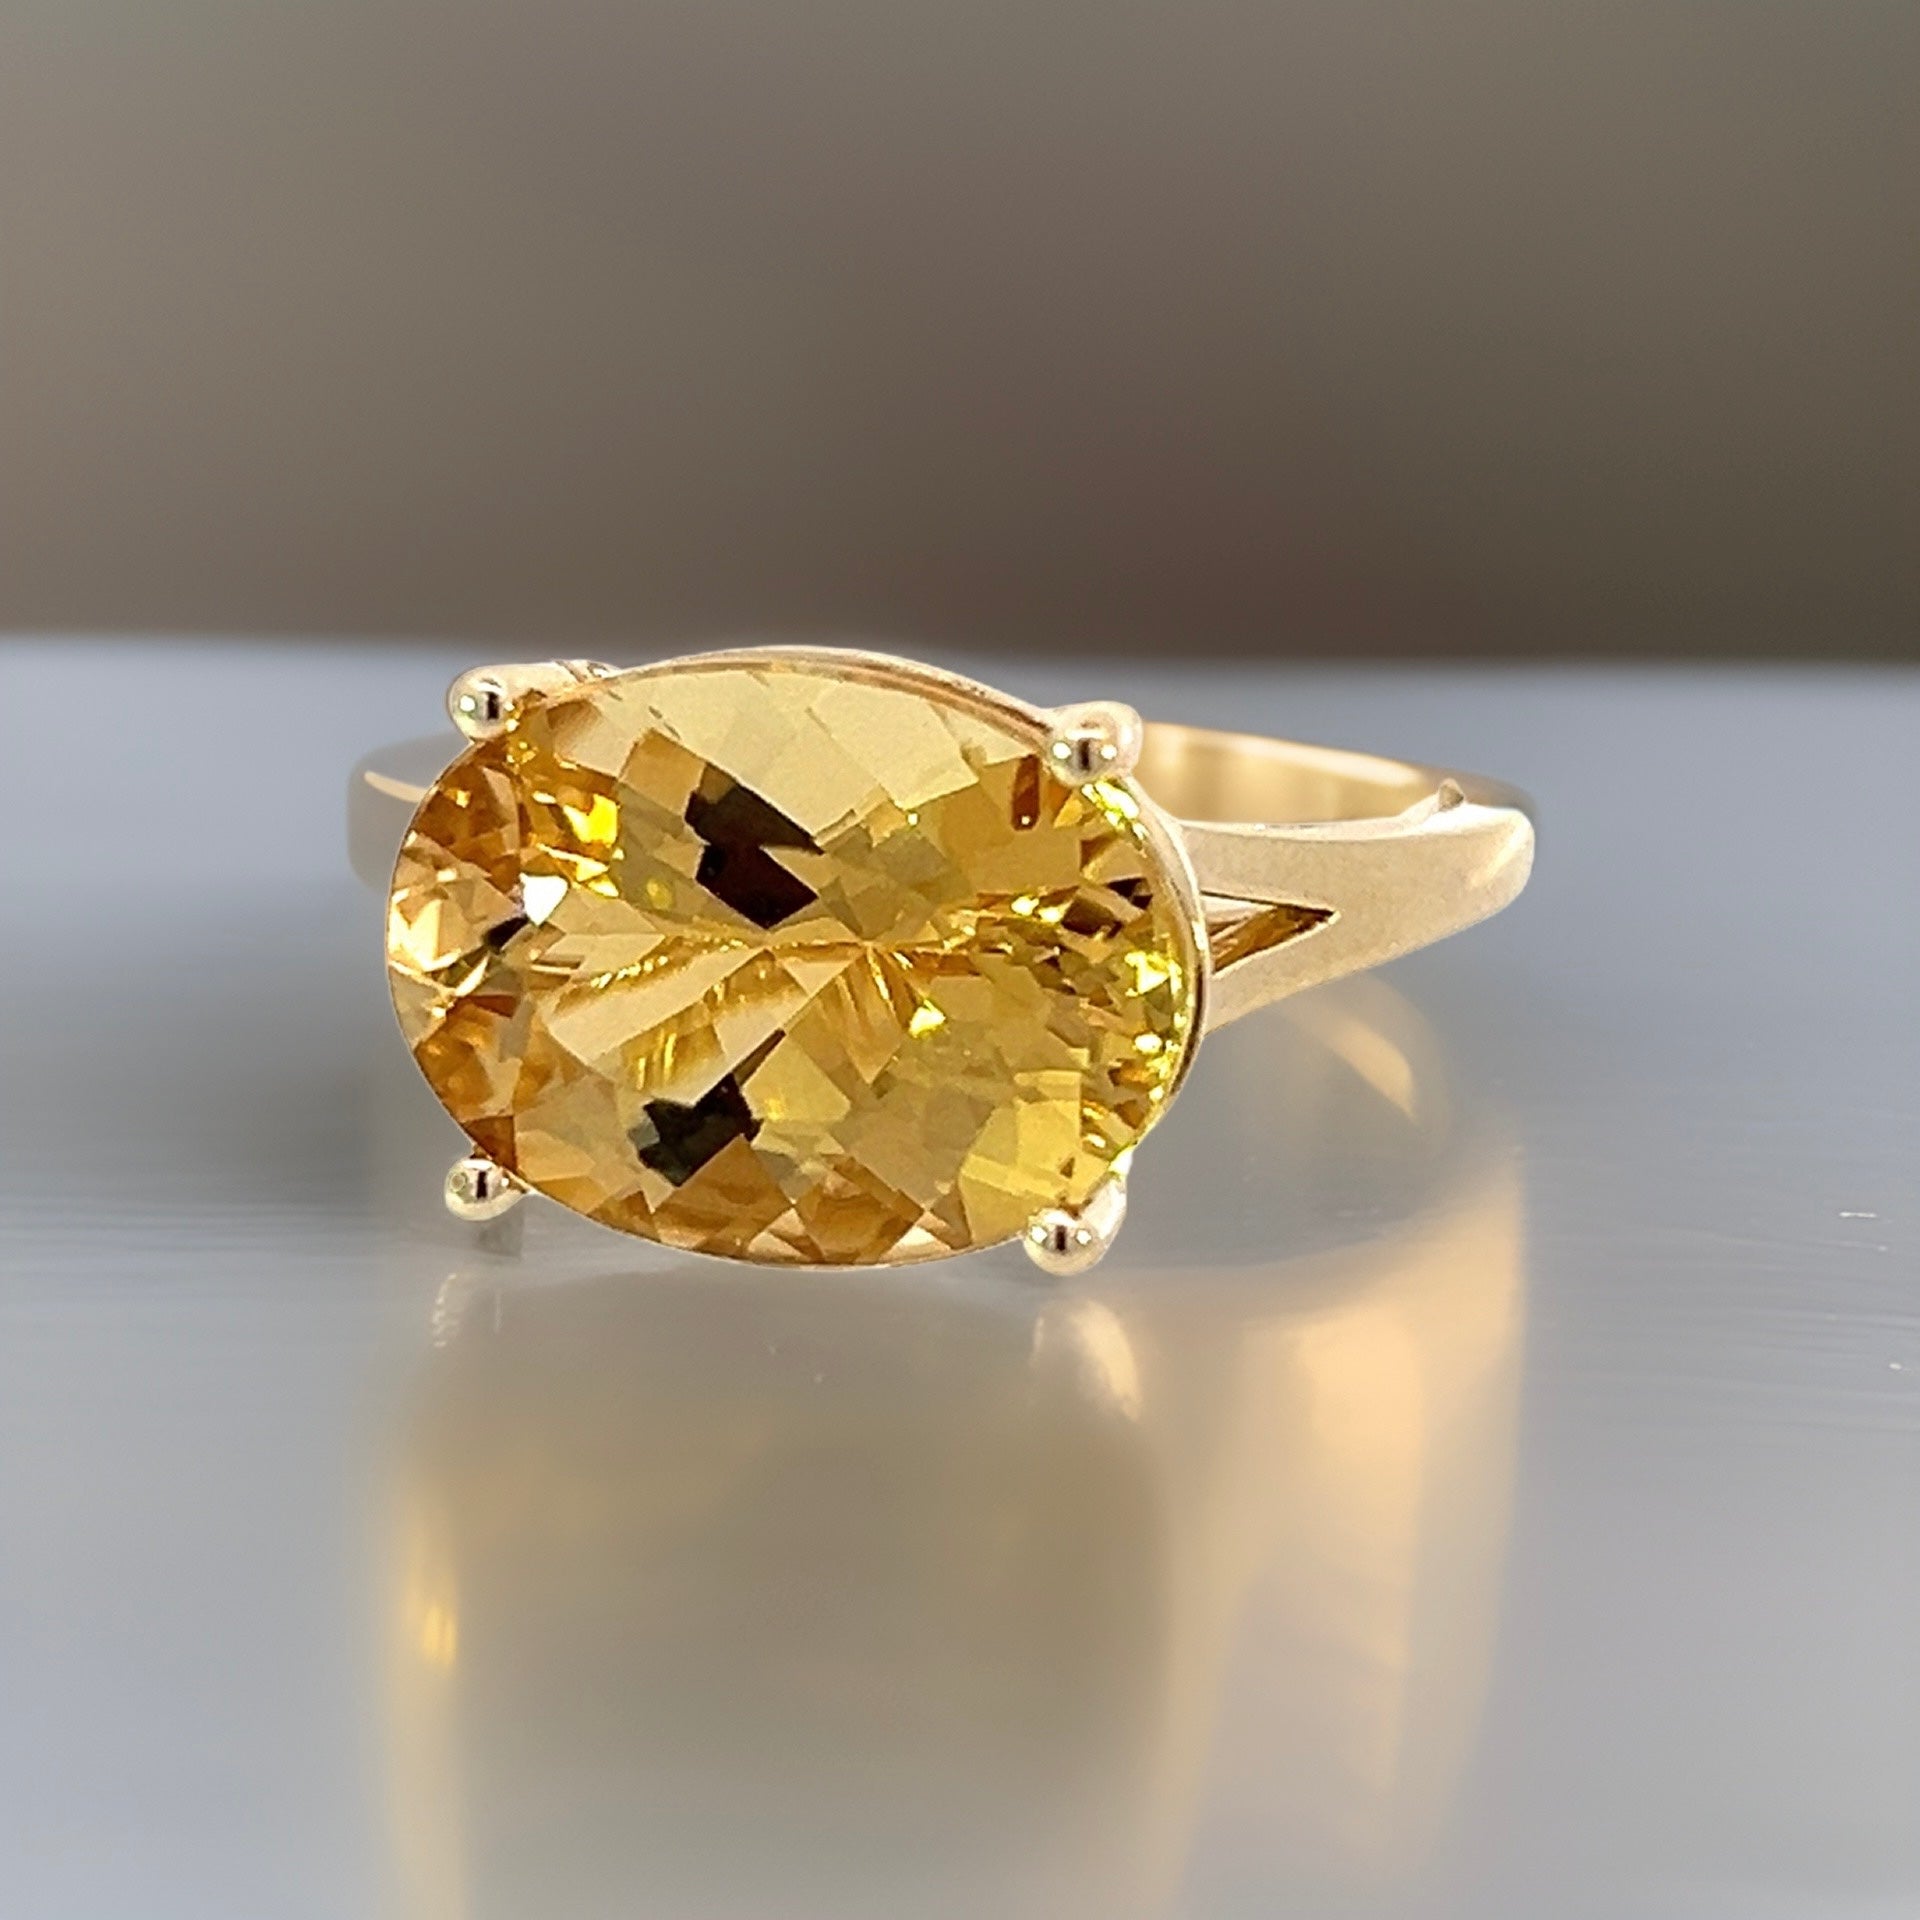 Natural Solitaire Citrine Ring 6.5 14k Y Gold 5.47 Cts Certified $2,950 310626 - Certified Fine Jewelry